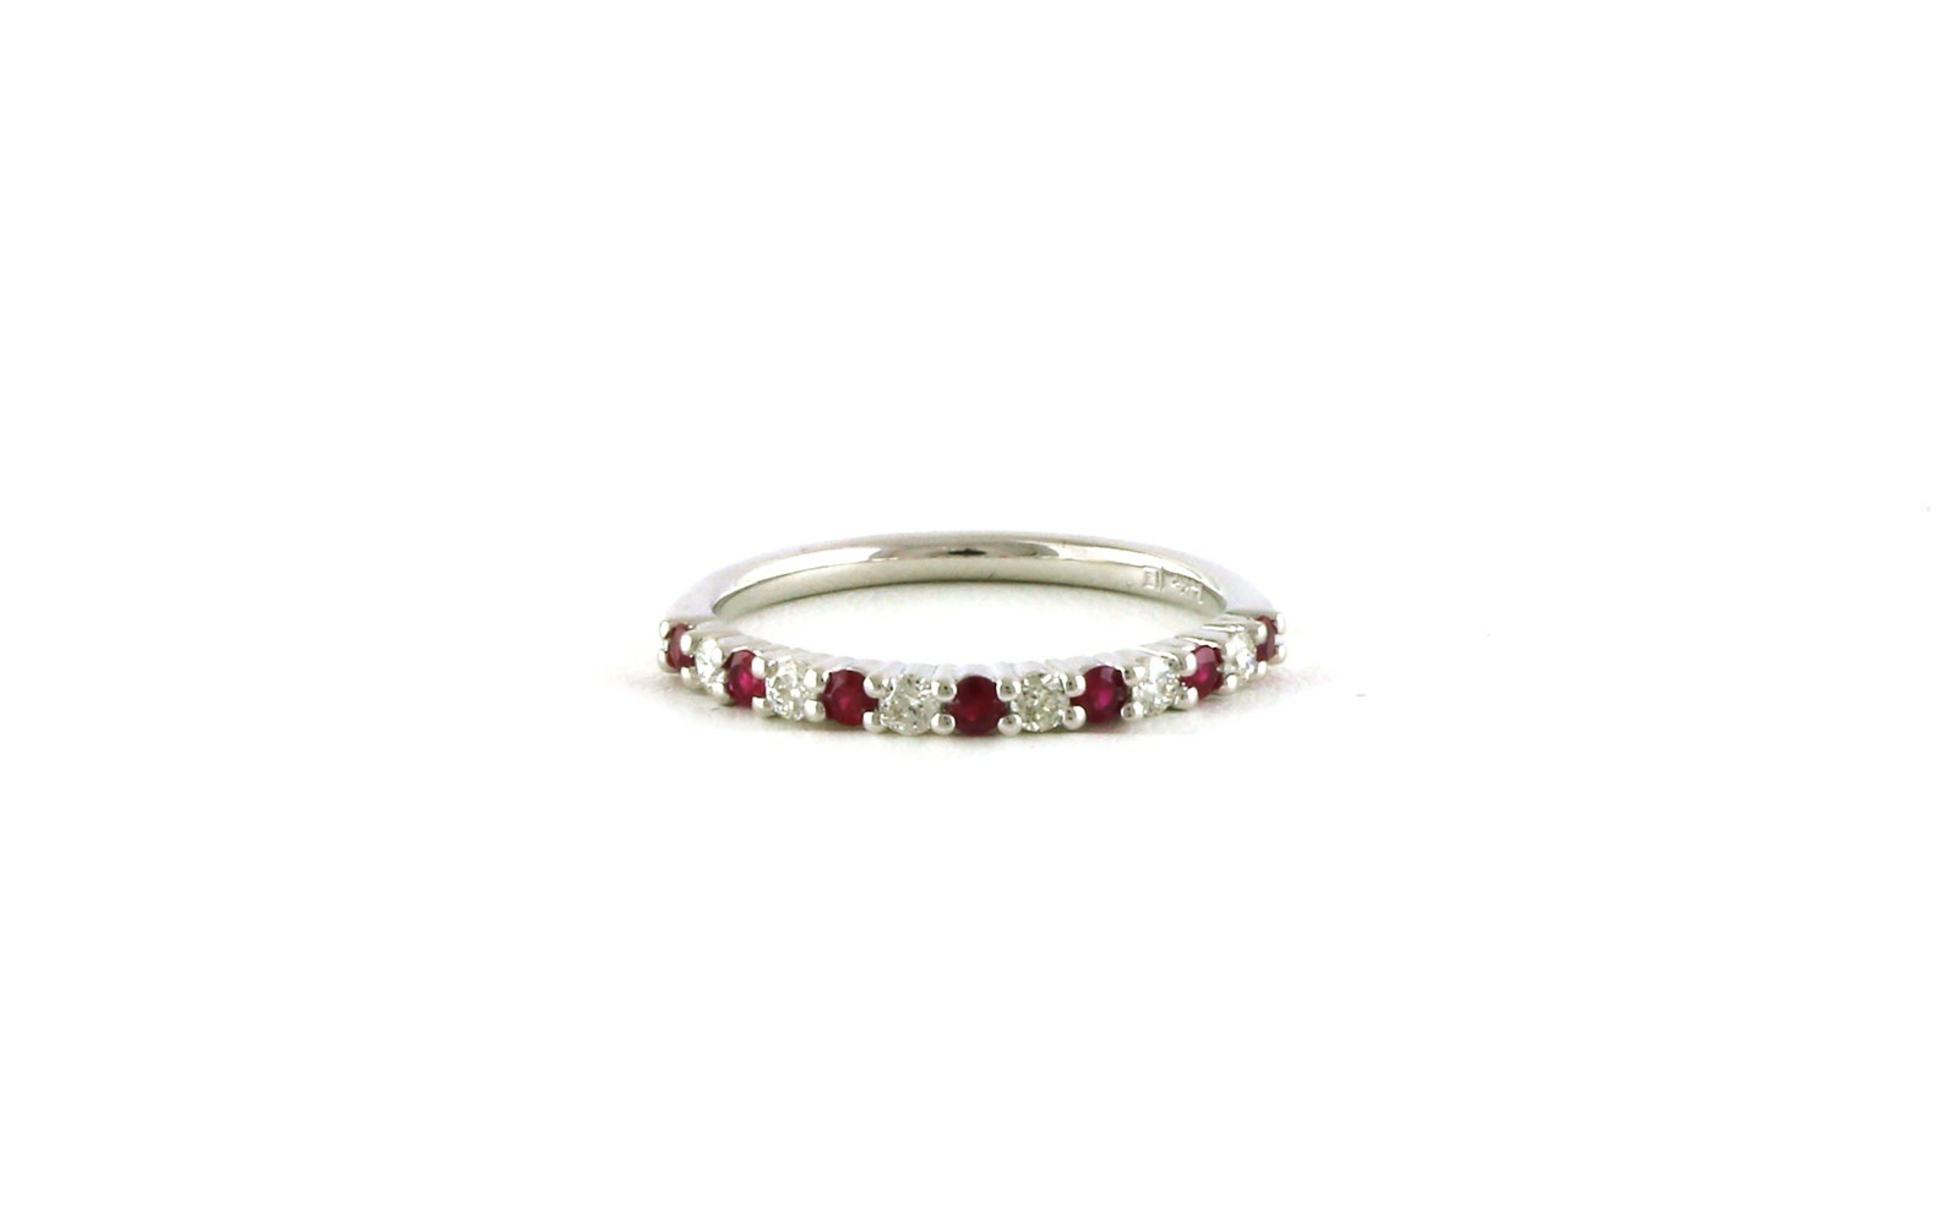 13-Stone Alternating Ruby and Diamond Wedding Band in White Gold (0.47cts TWT)